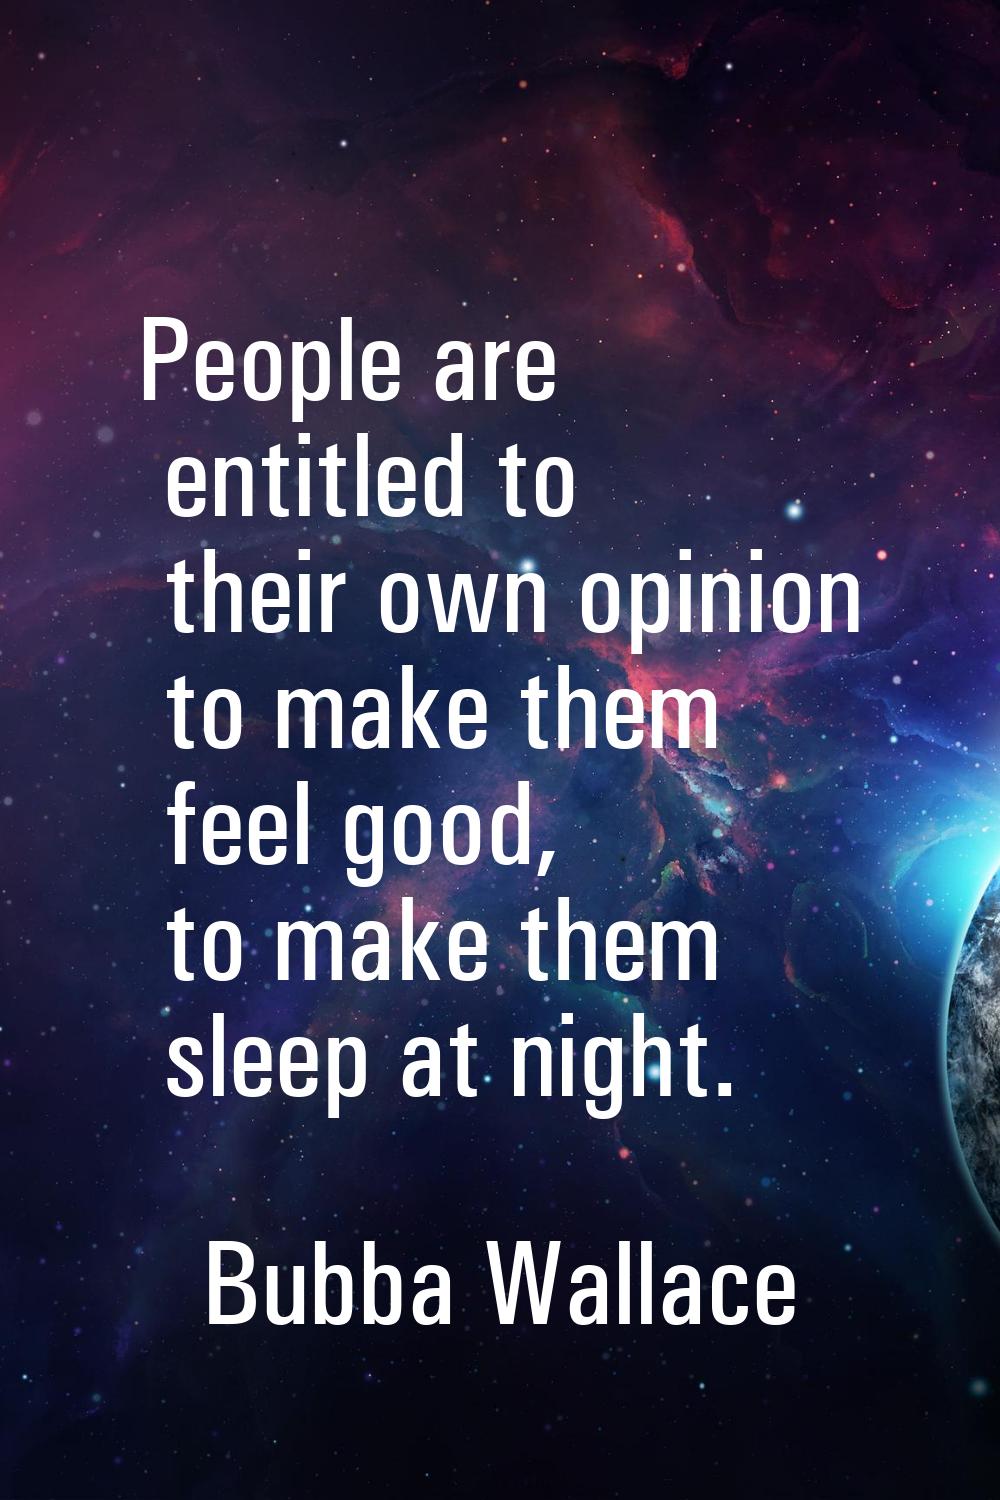 People are entitled to their own opinion to make them feel good, to make them sleep at night.